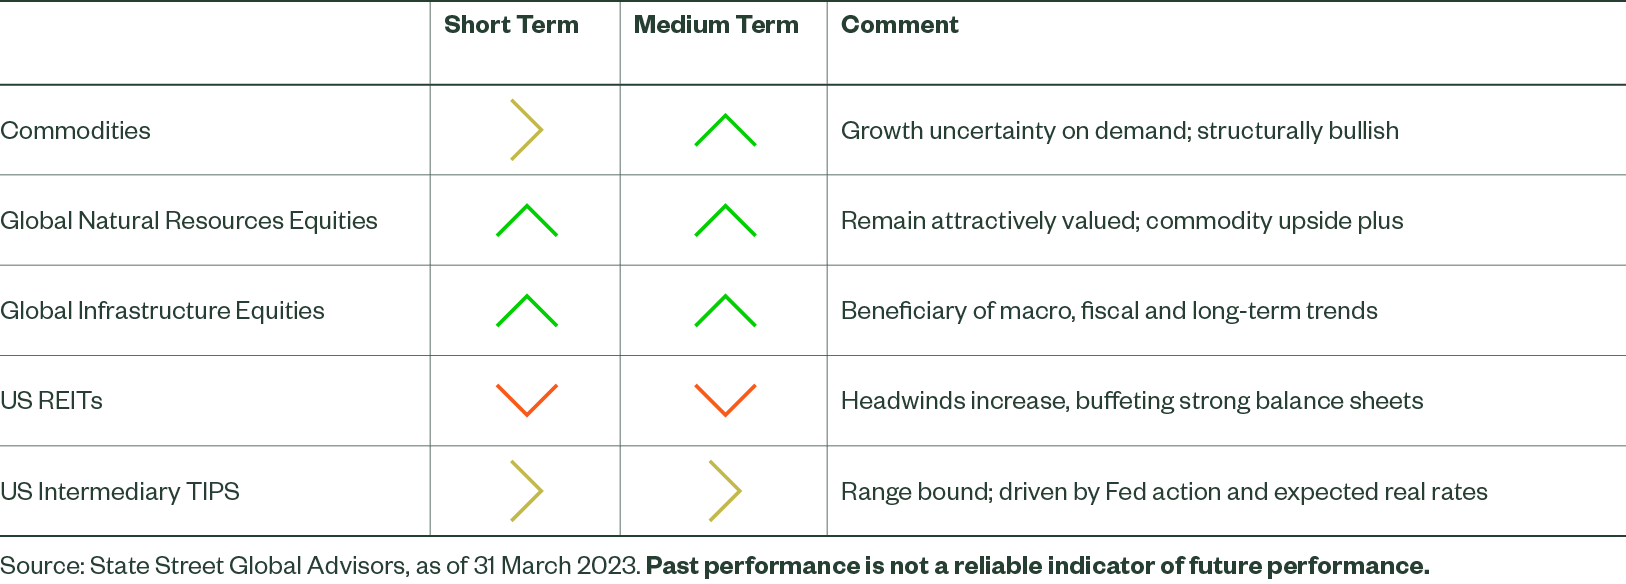 Short- and Medium-Term Directional Outlooks